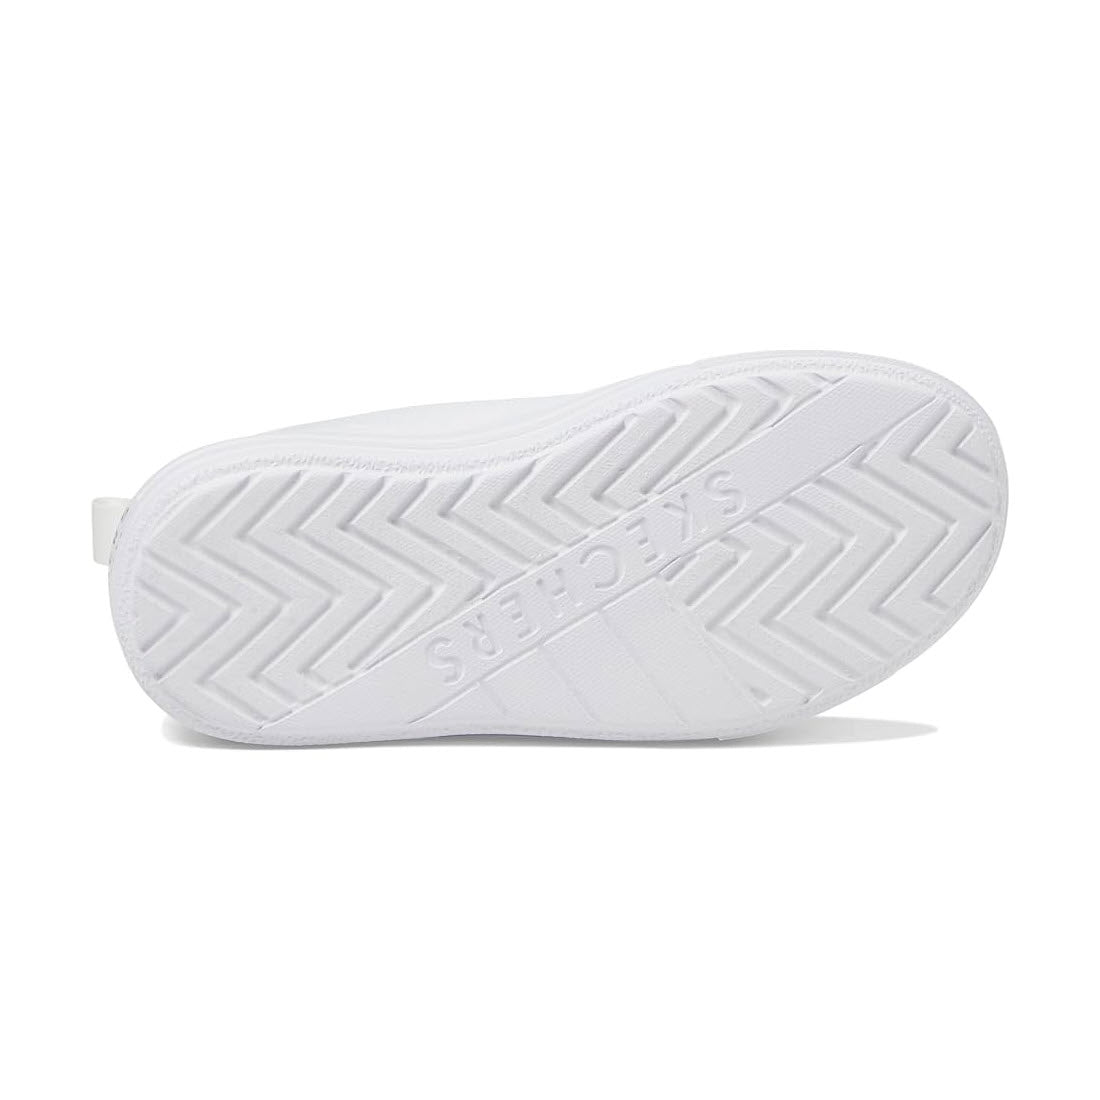 High-top Skechers Hyperlift White sneaker sole with textured pattern and visible brand name embossed.